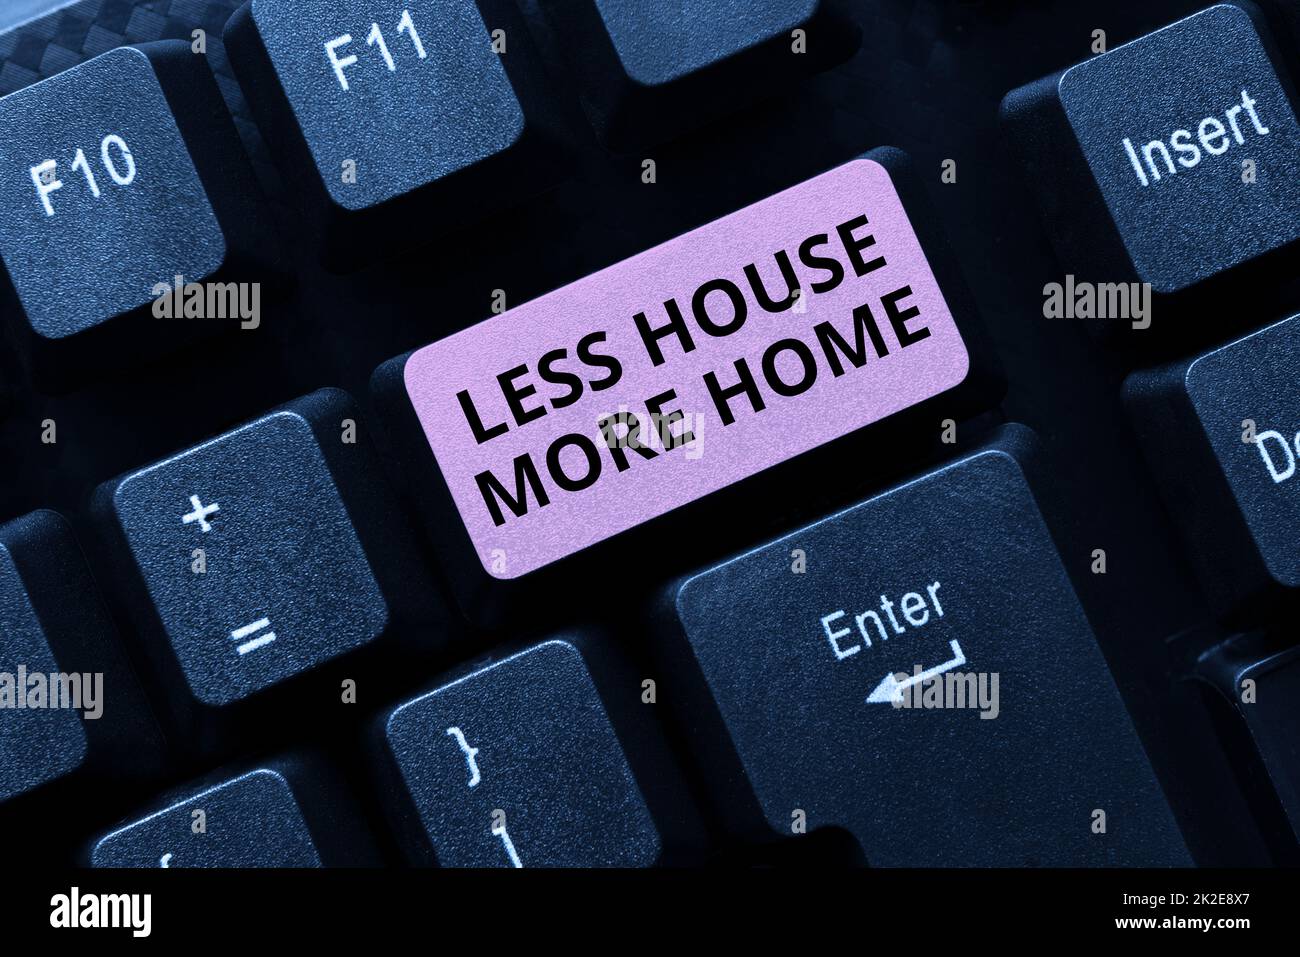 Text caption presenting Less House More Home. Business showcase small family community Bonding and stay together Editing And Retyping Report Spelling Errors, Typing Online Shop Inventory Stock Photo